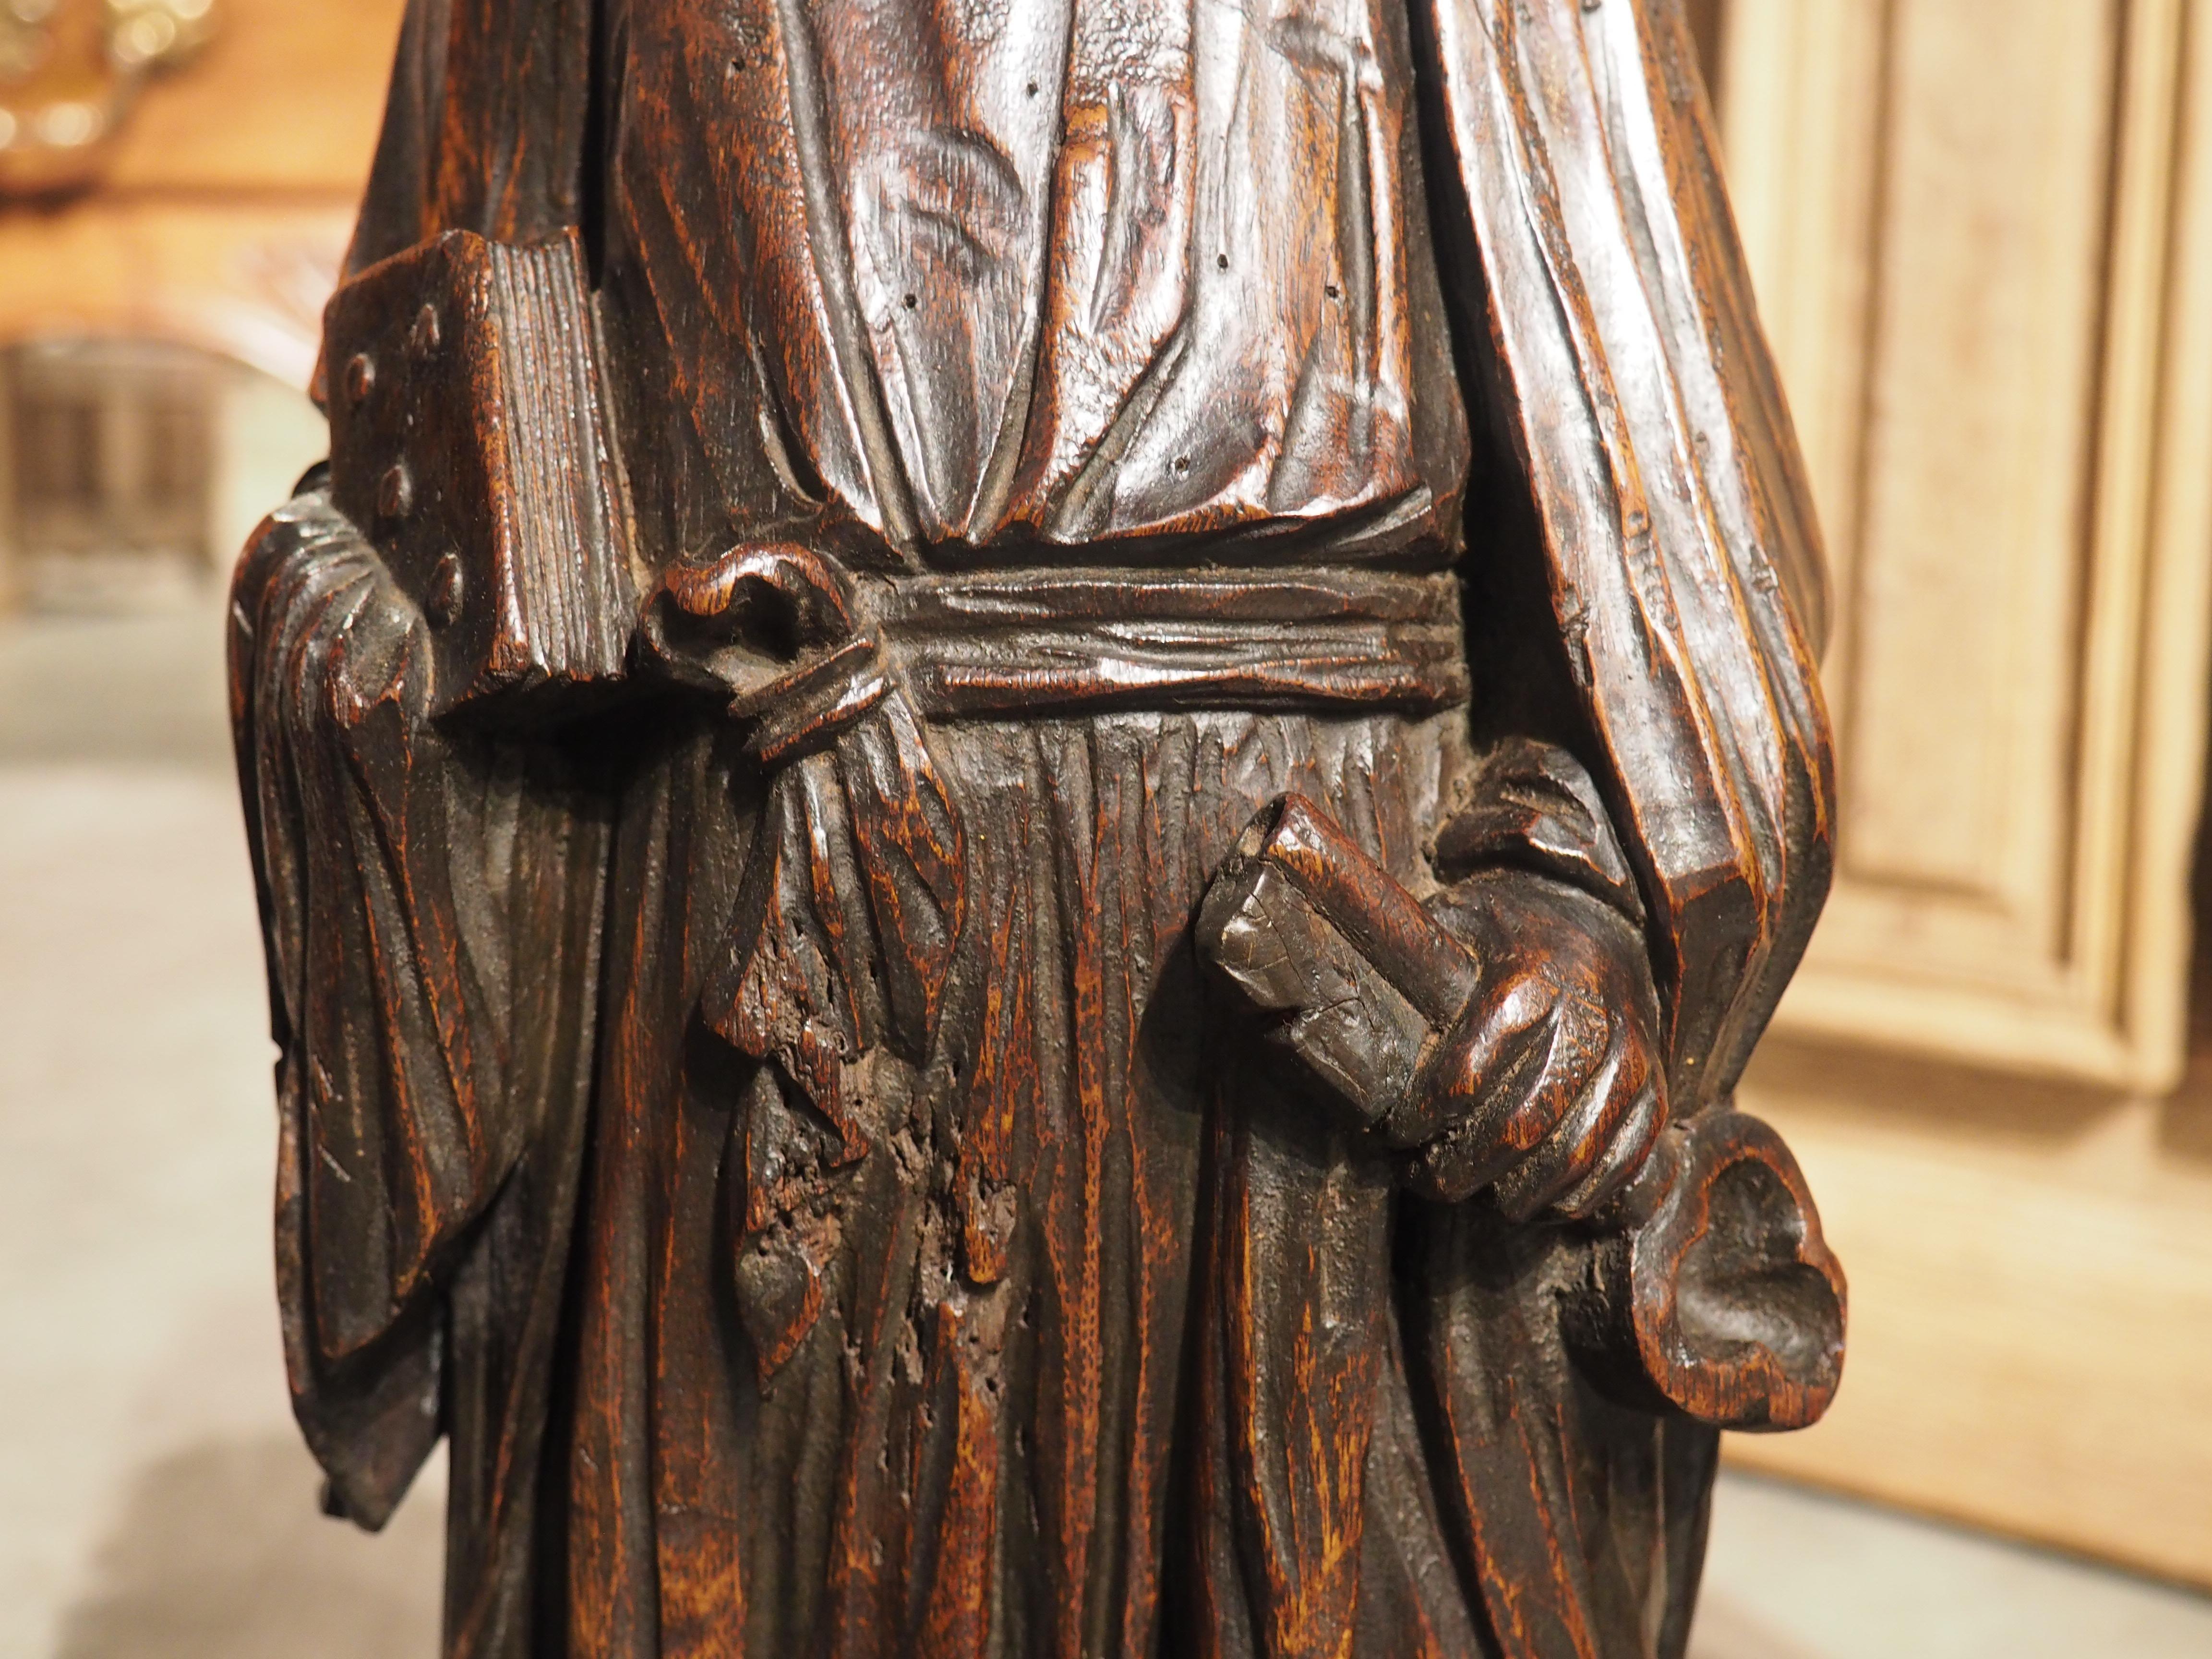 Circa 1800 Carved Oak Sculptures of the Apostles, James, John, Peter, and Paul For Sale 2